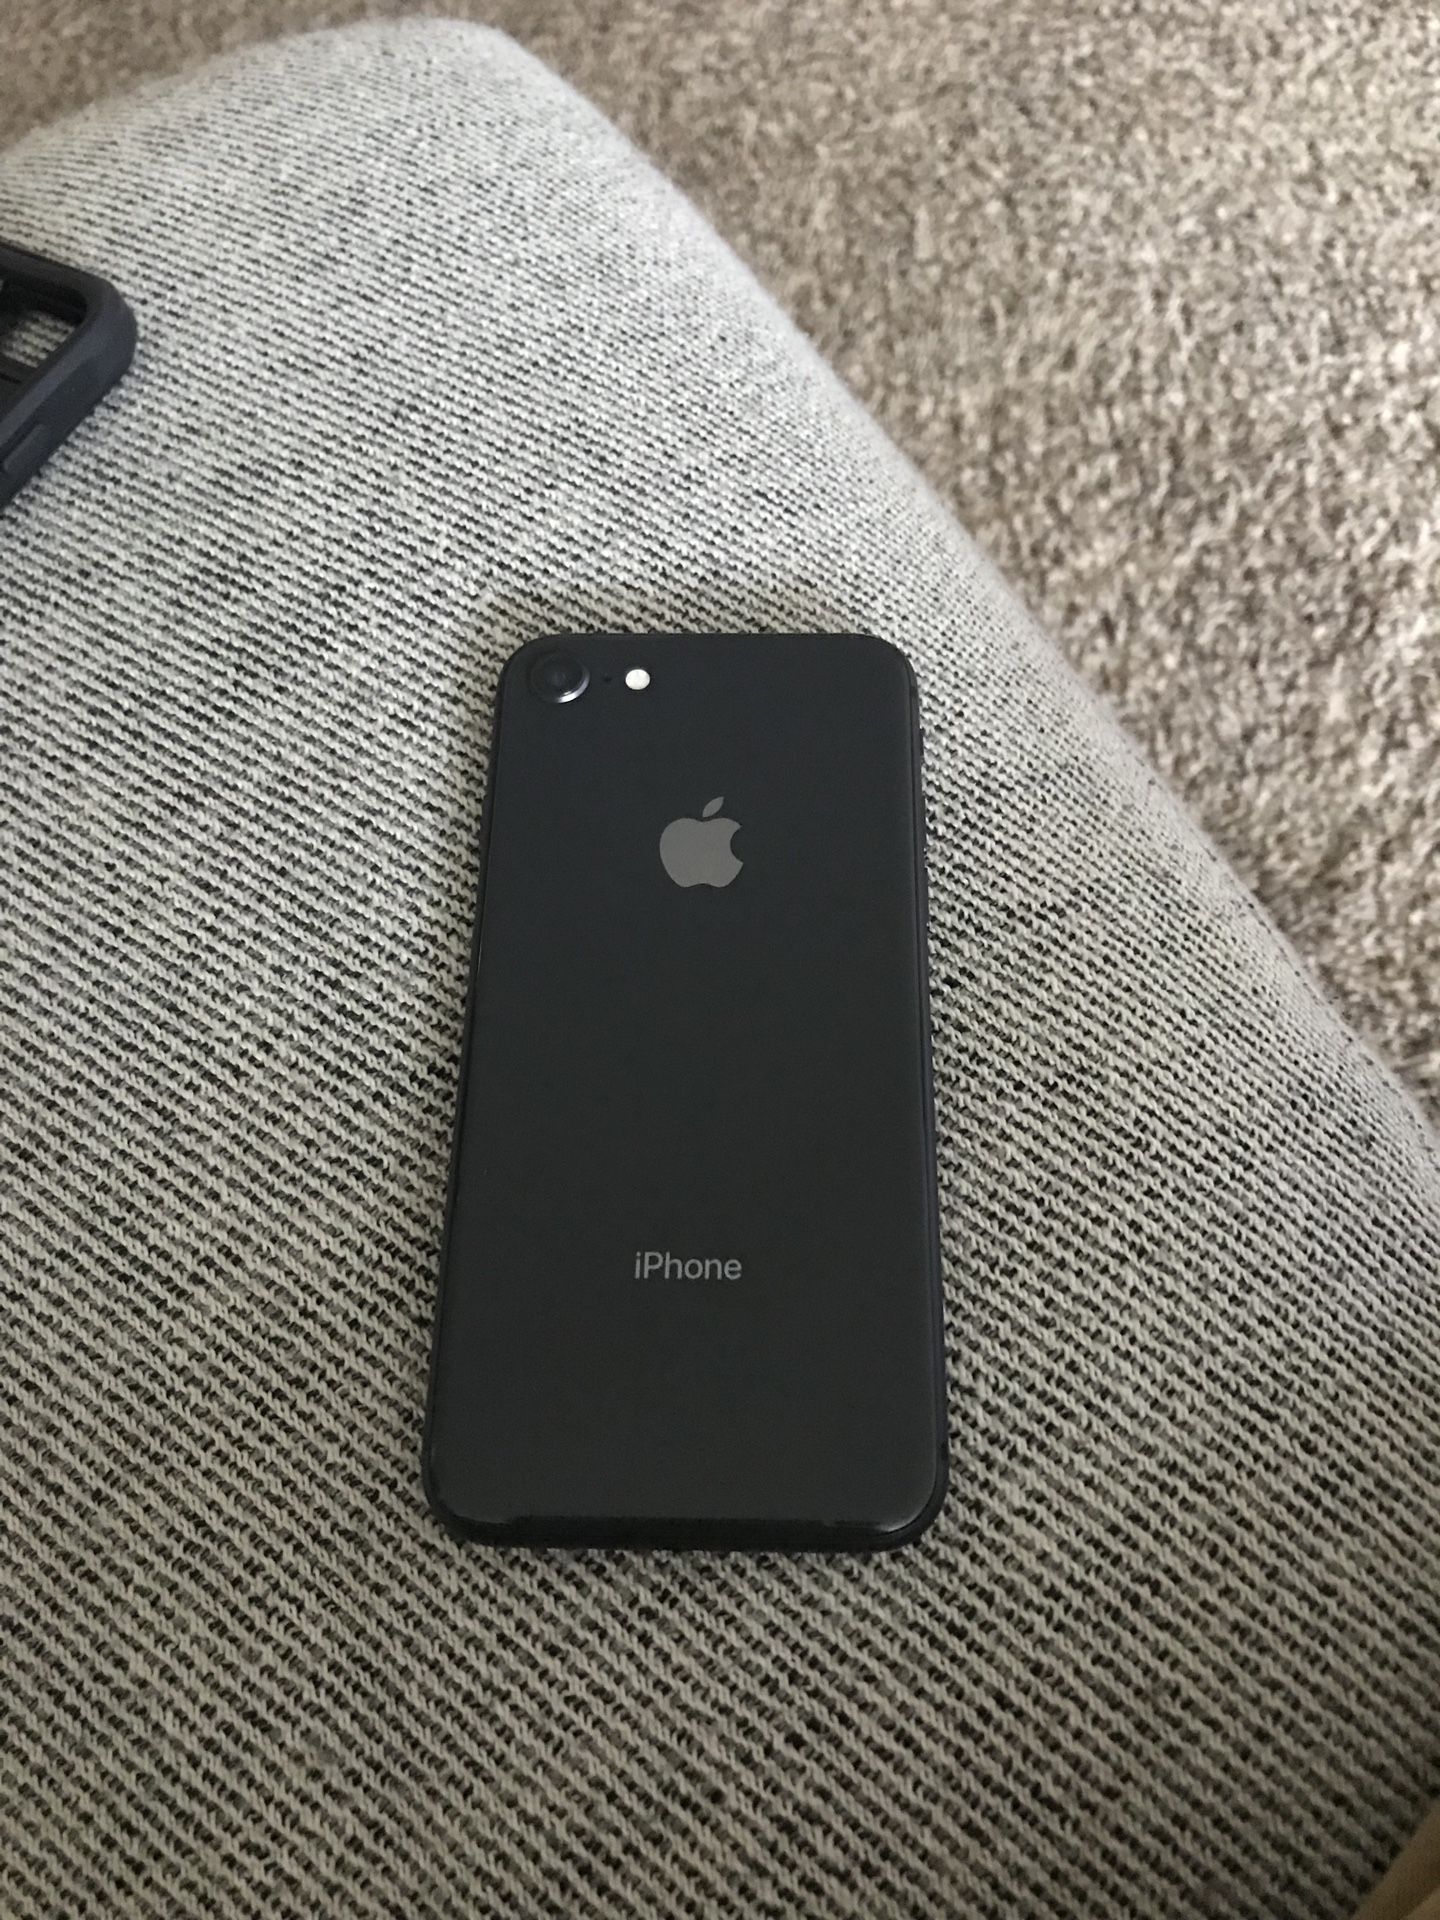 iPhone 8 256gb the carrier is at&t